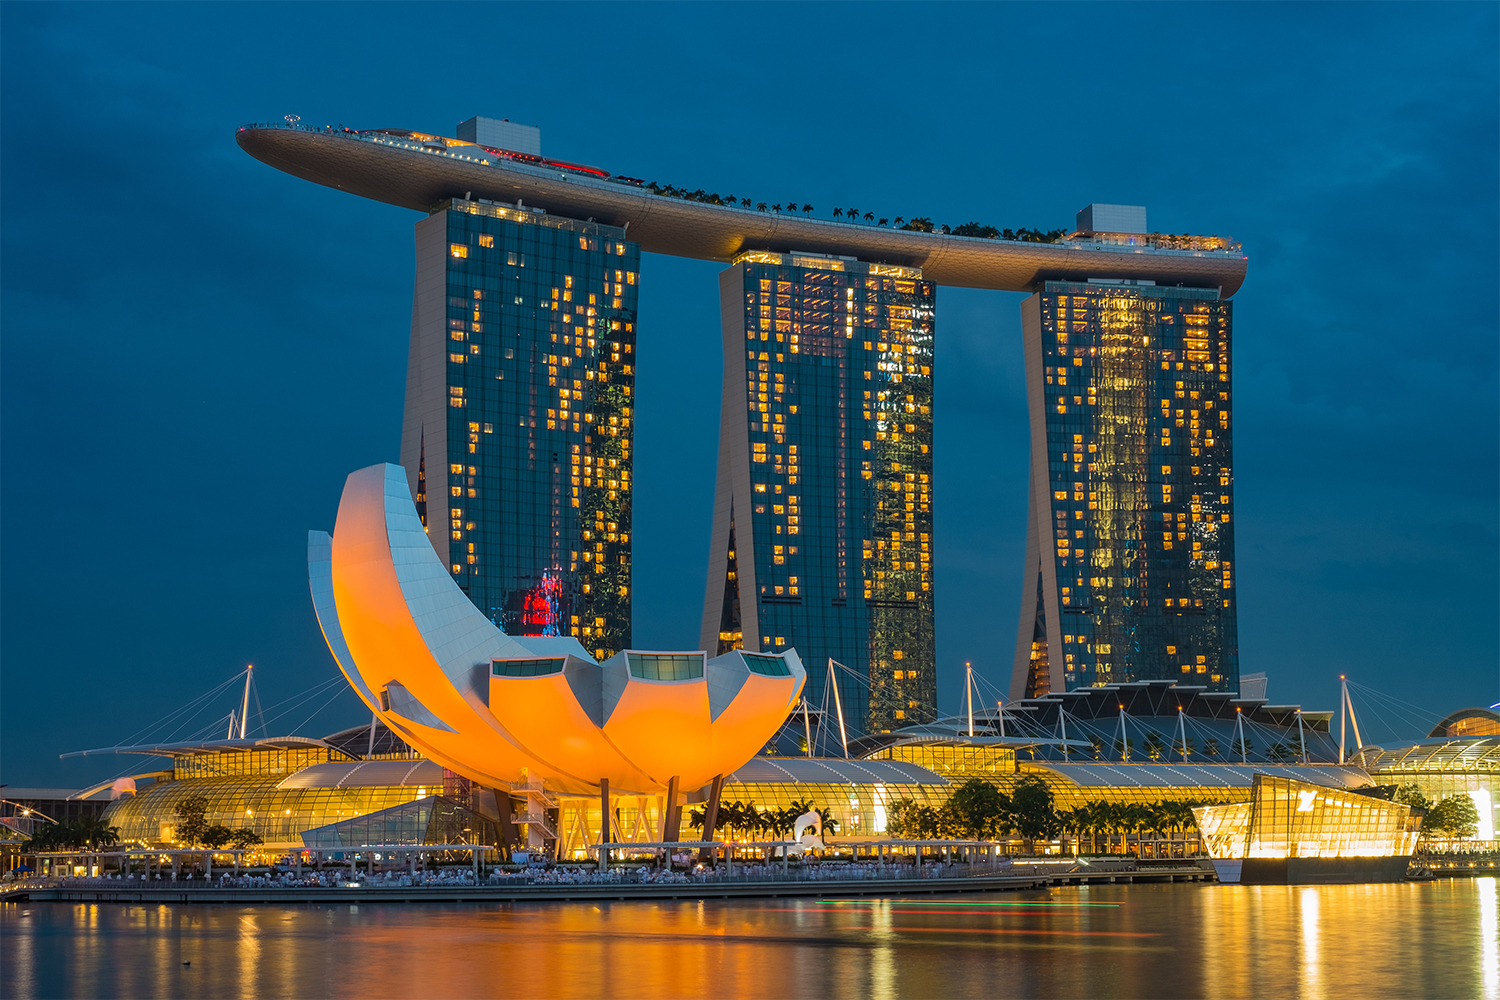 The Marina Bay Sands hotel in Singapore at night